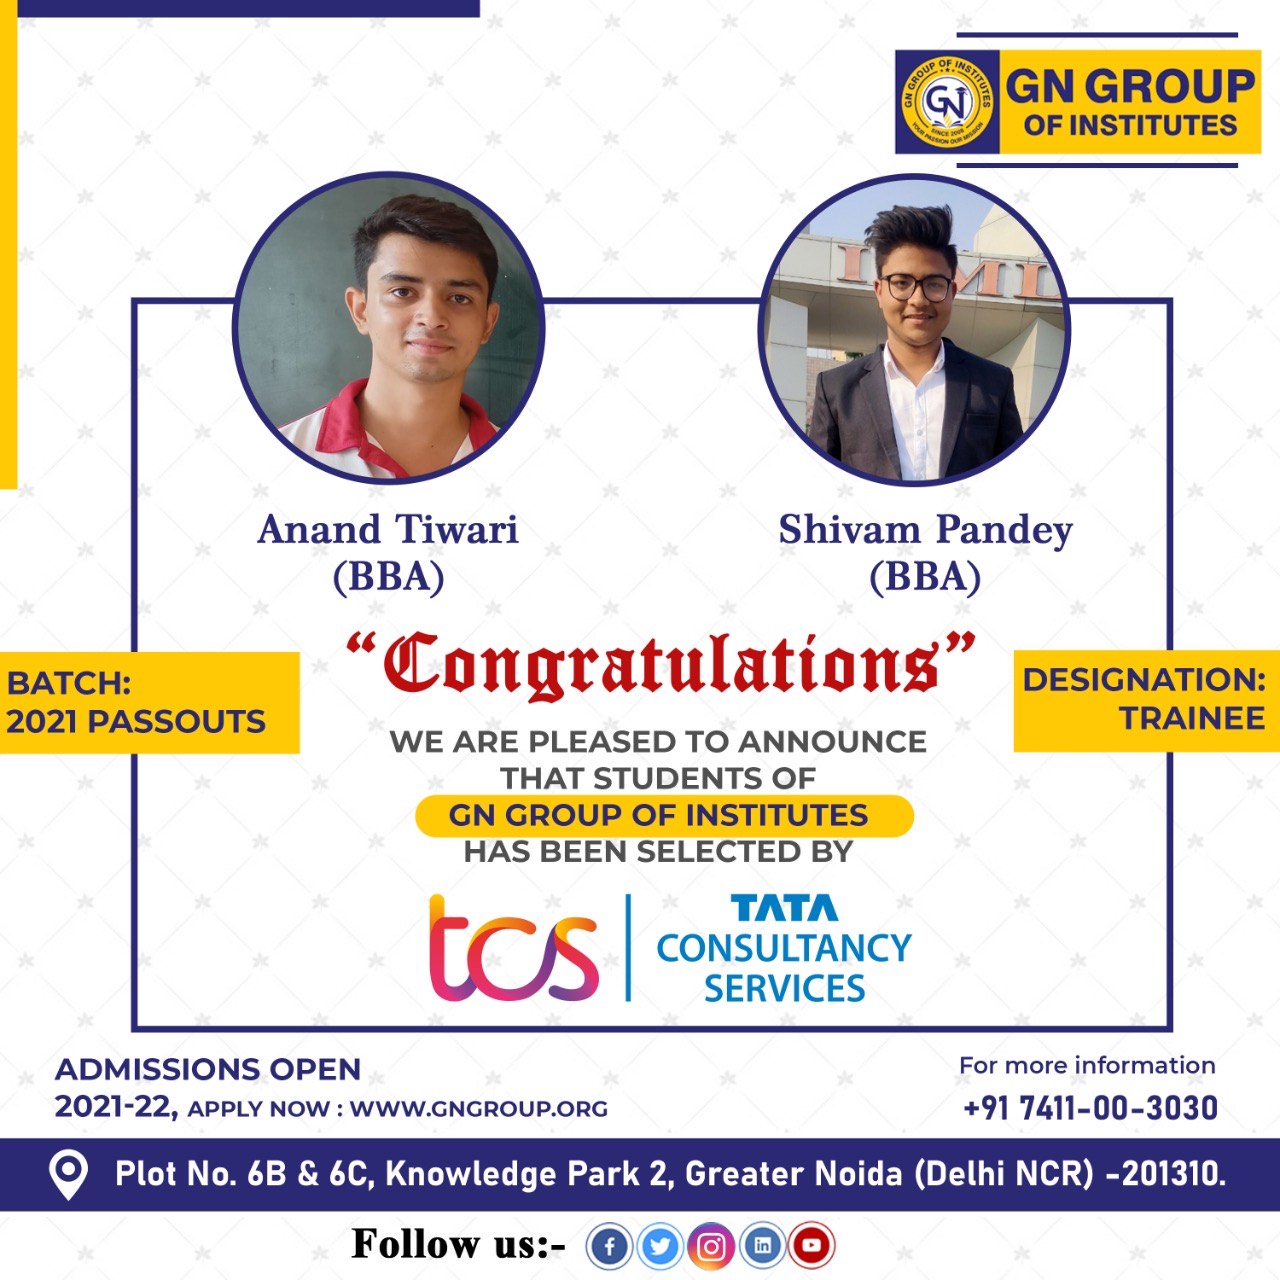 Placed Students - GN Group Greater Noida